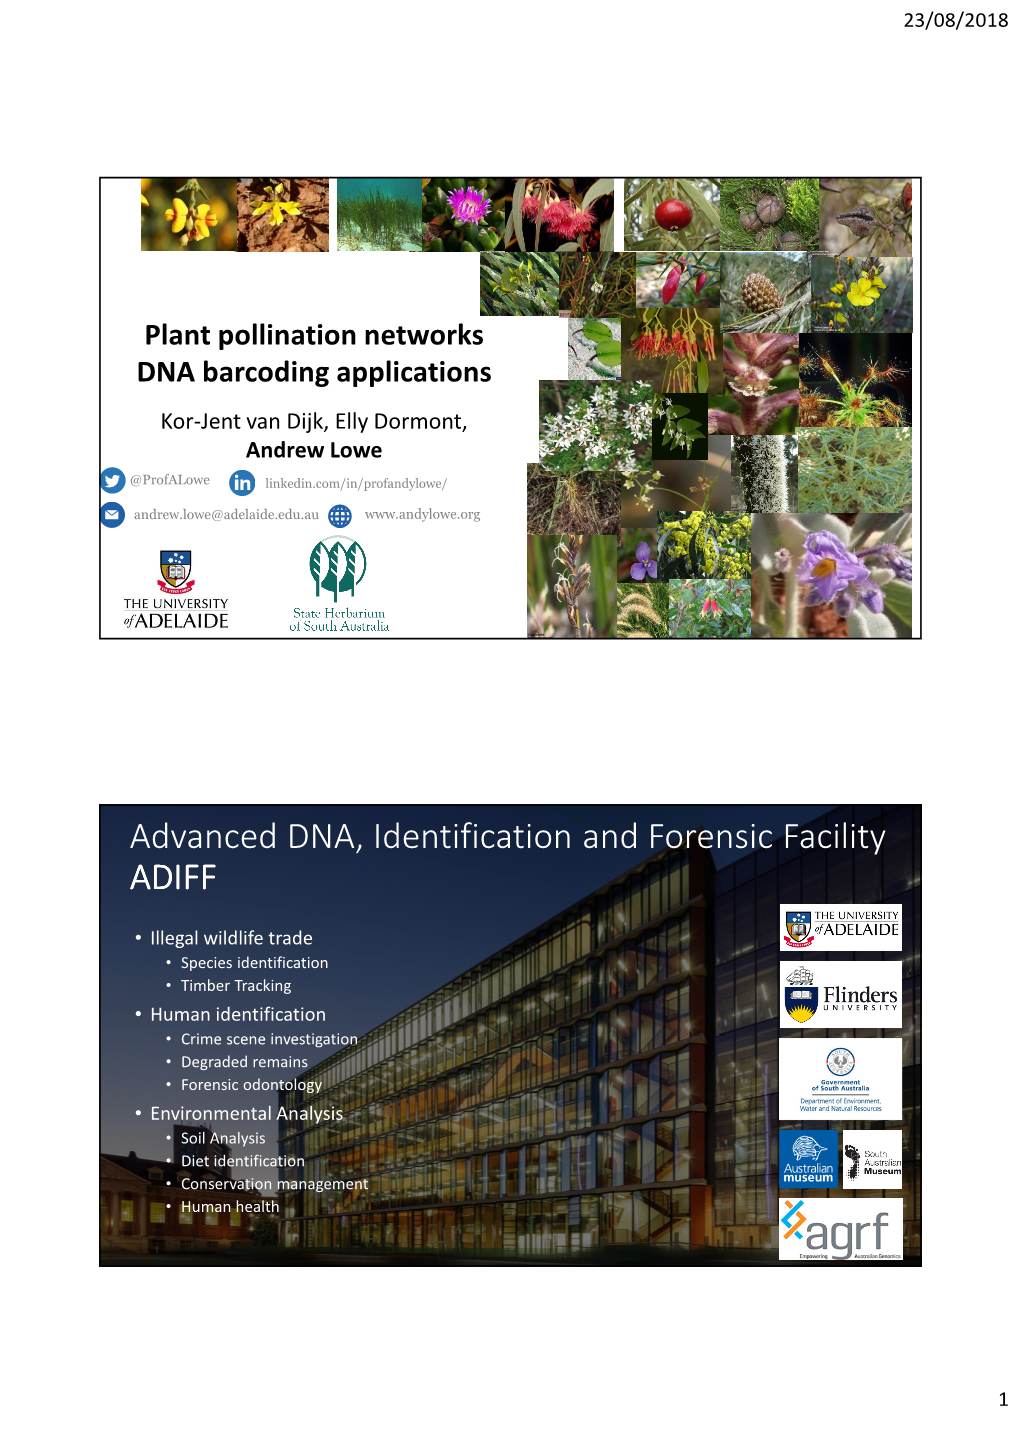 Advanced DNA, Identification and Forensic Facility ADIFF